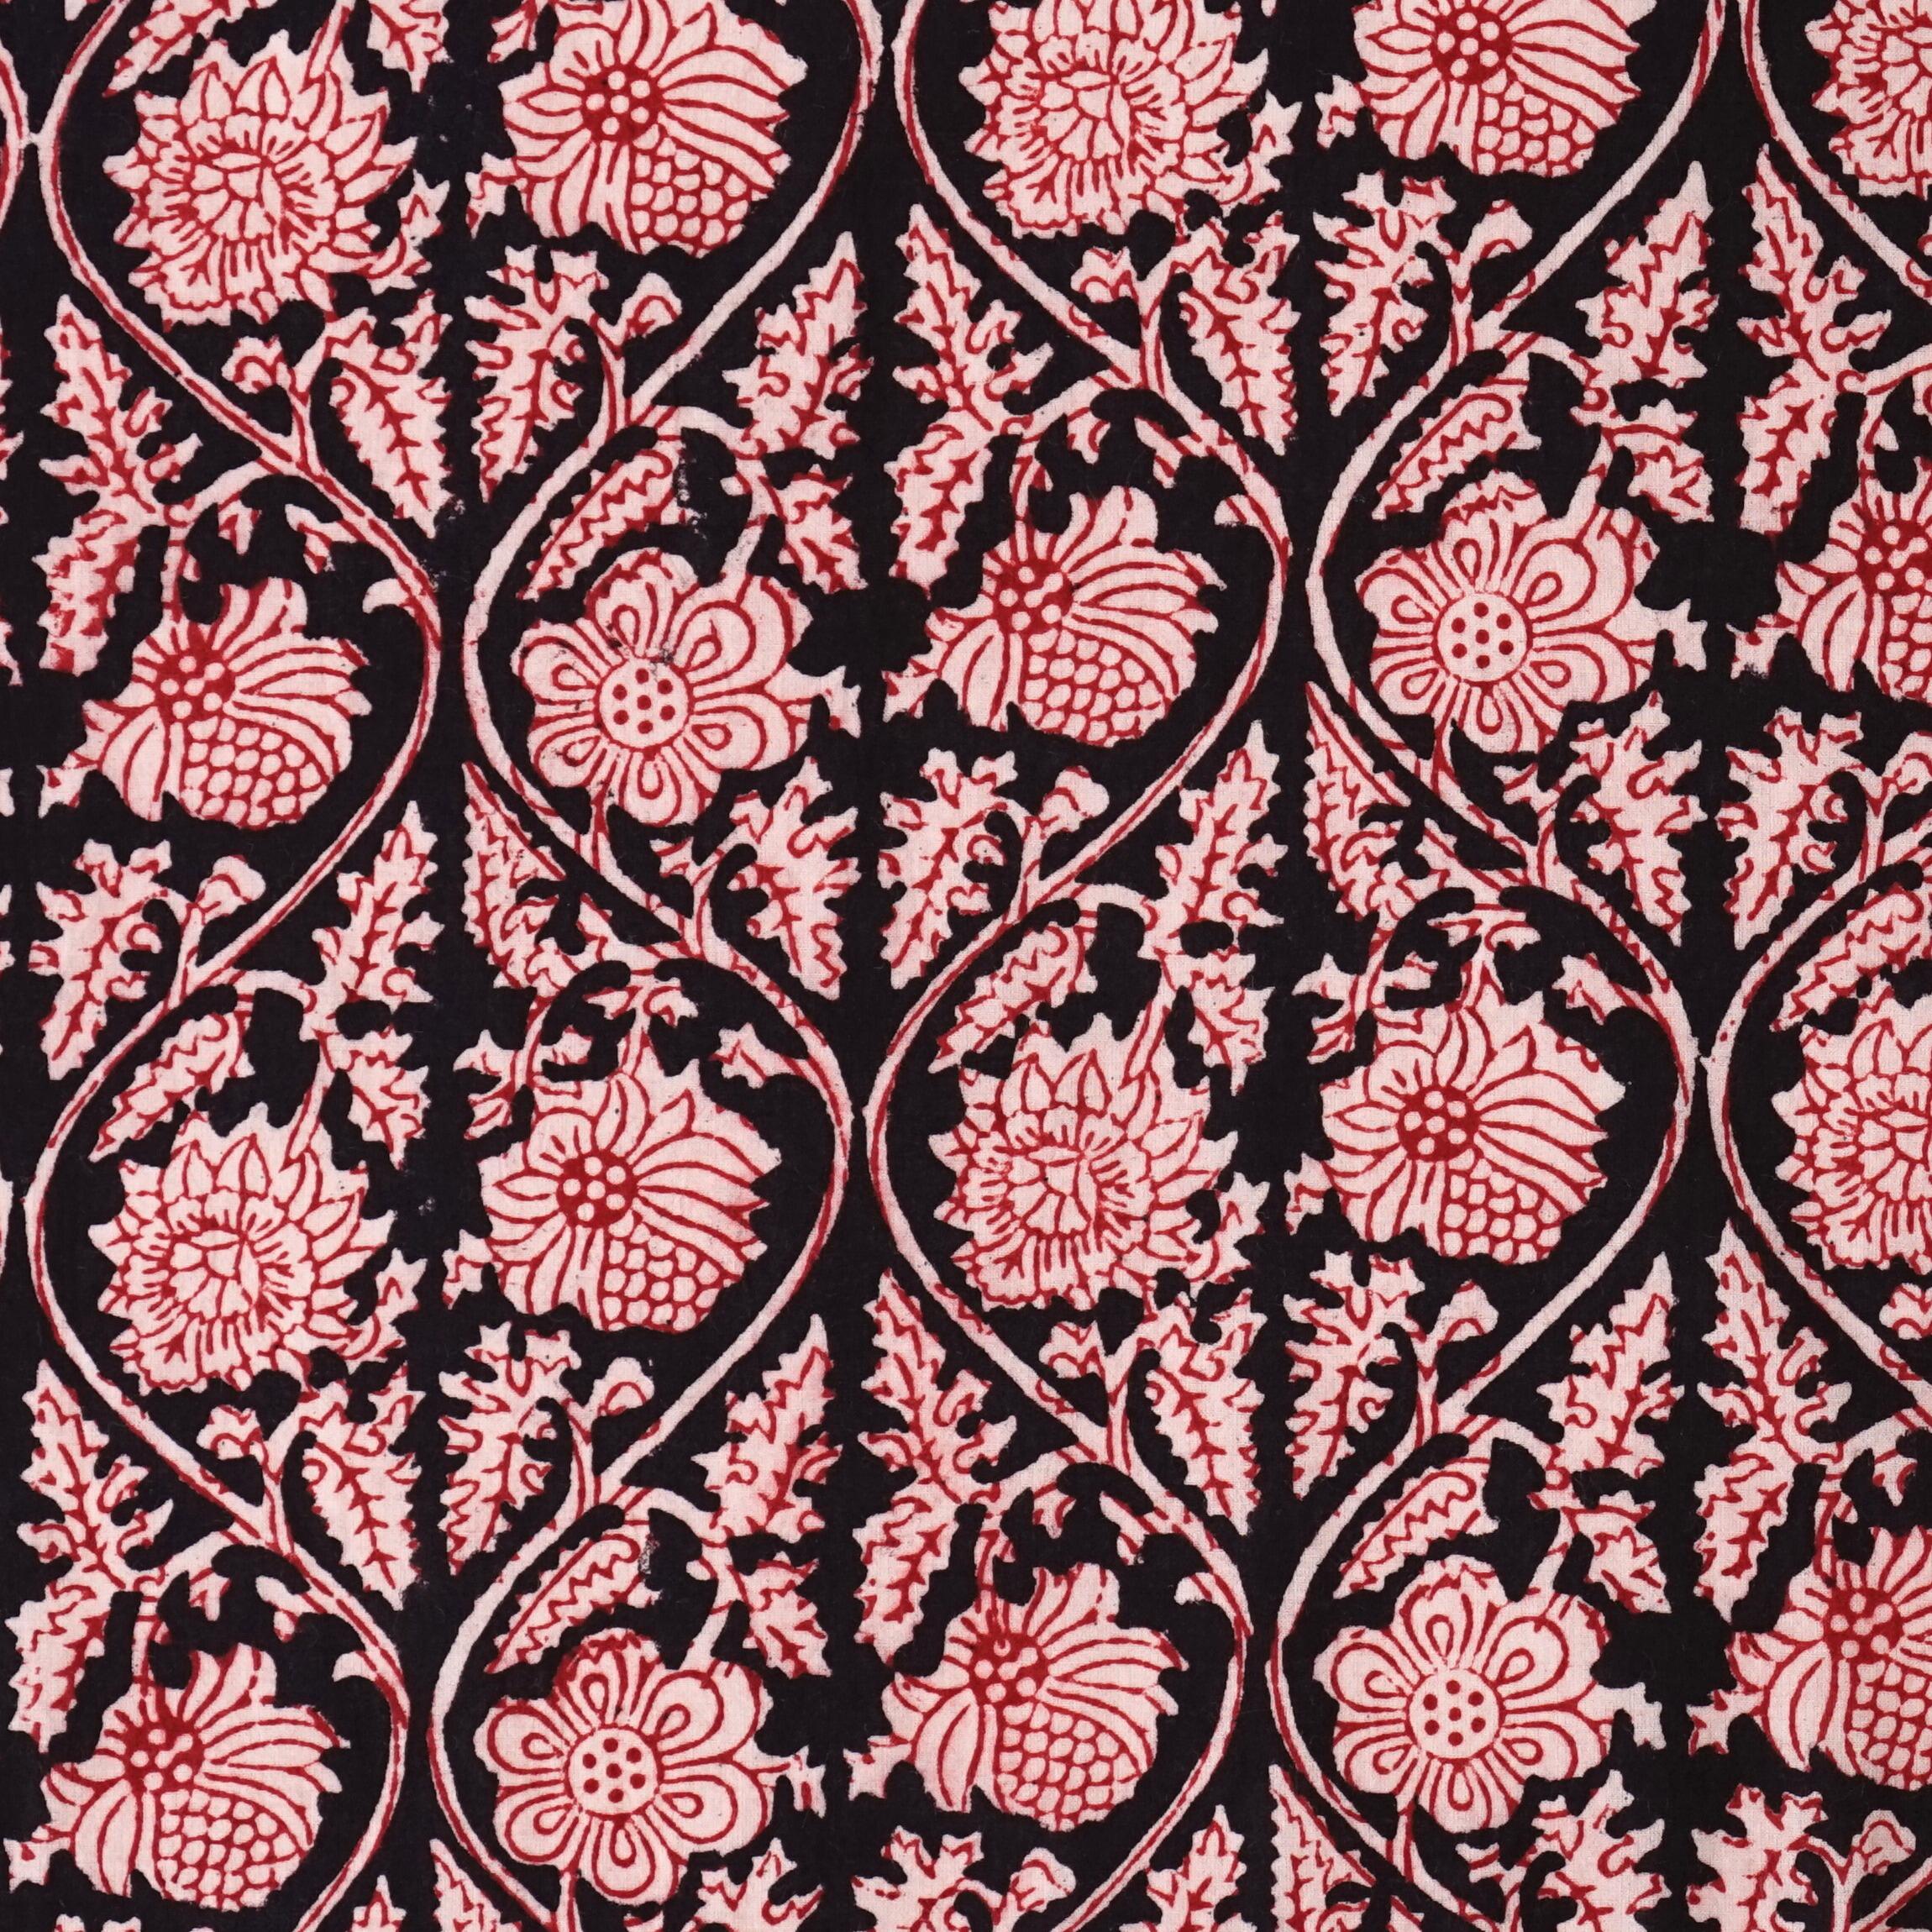 100% Block-Printed Cotton Fabric From India - Vinea Design - Iron Rust Black & Alizarin Red Dyes - Flat